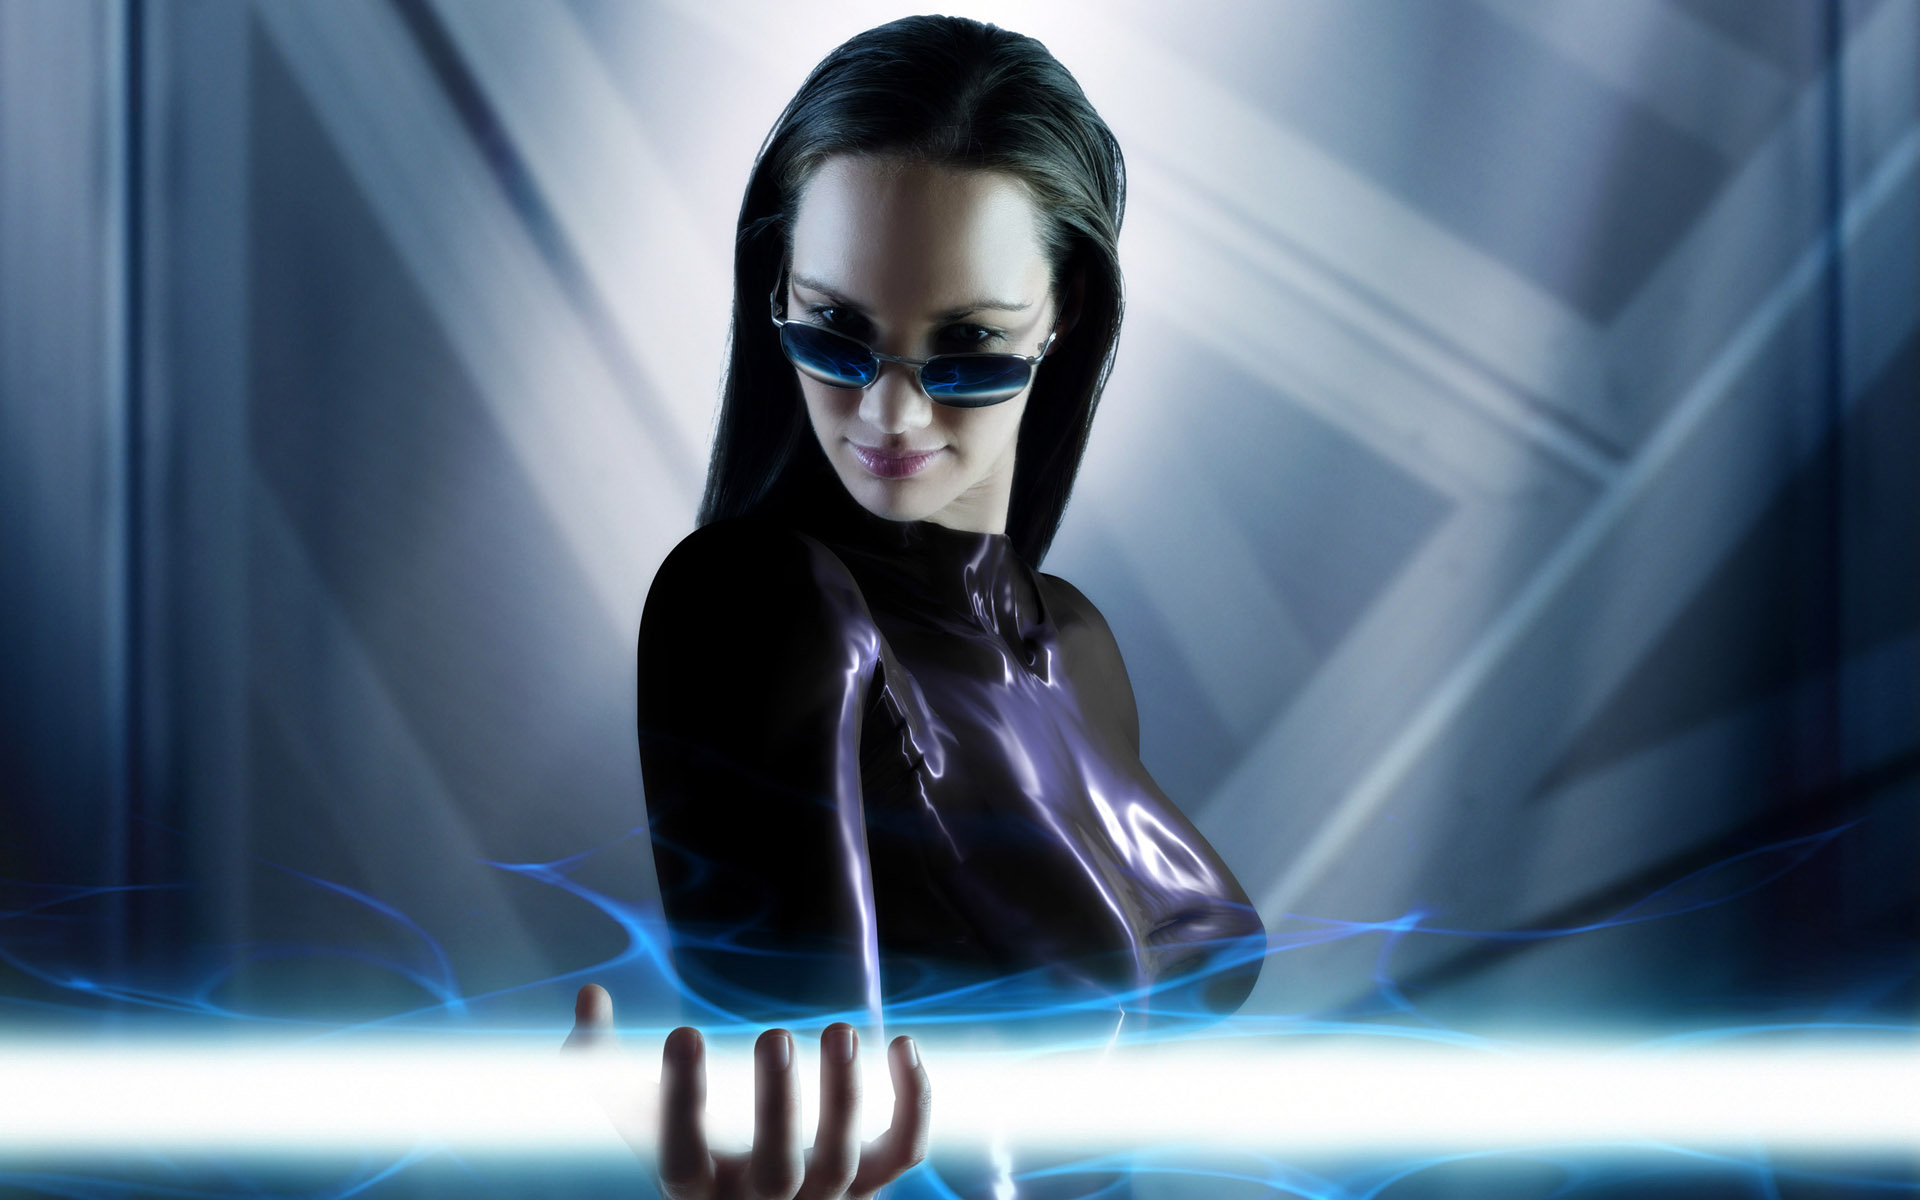 The girl and laser wallpapers and images   wallpapers pictures